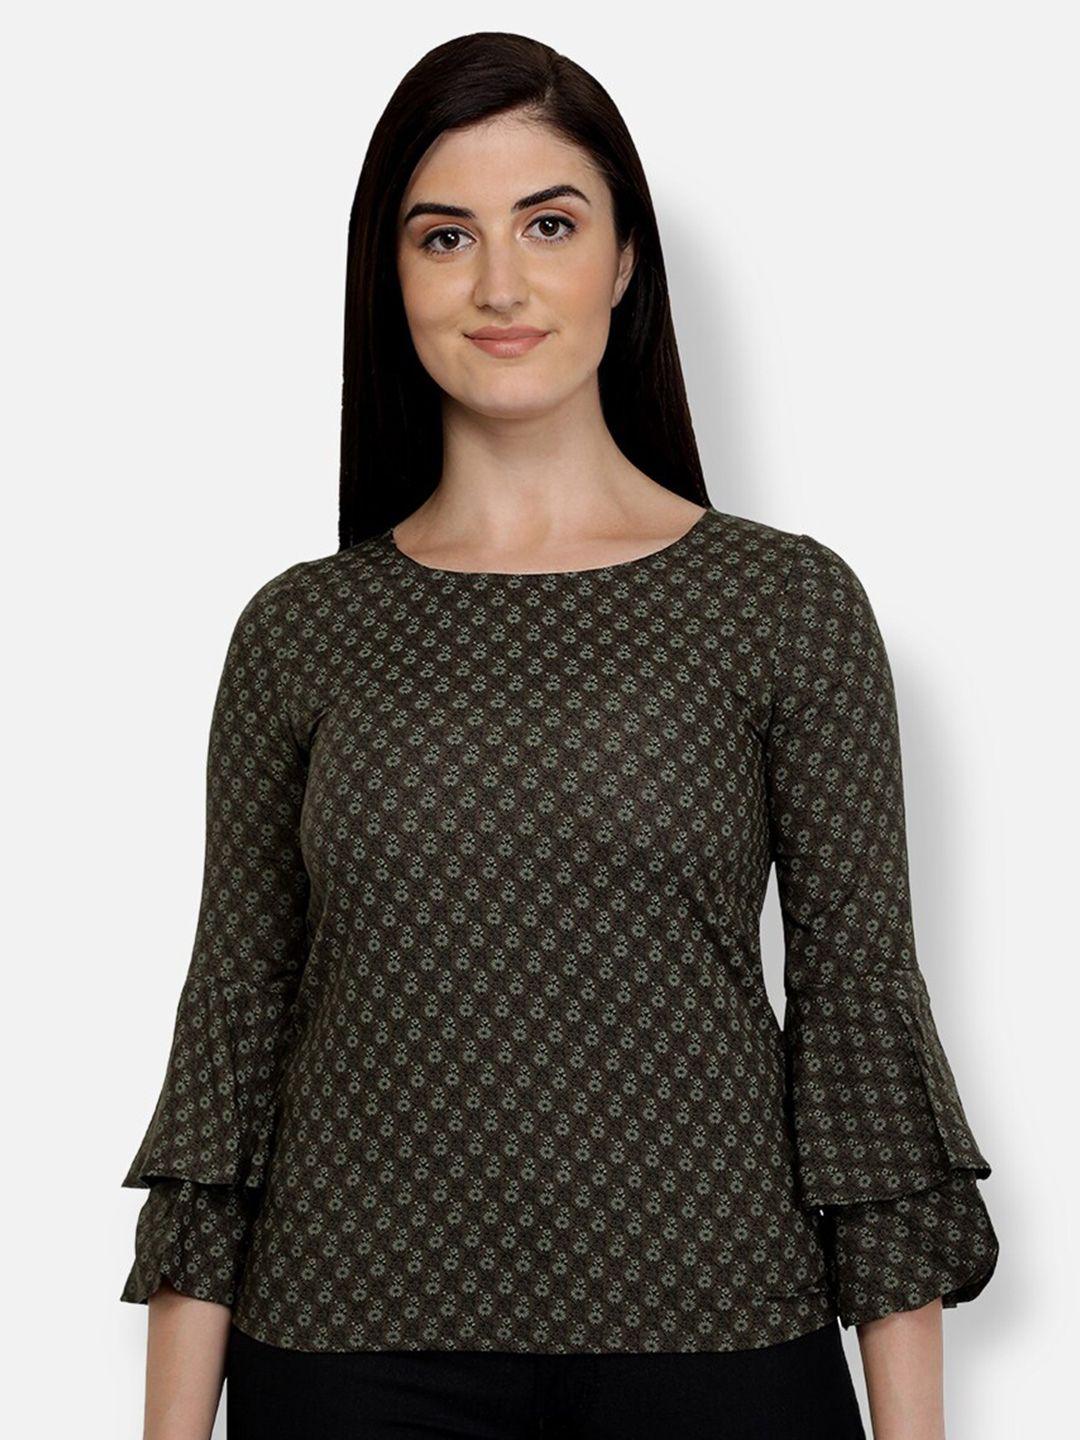 Ashtag Olive Green Printed Pure Cotton Top